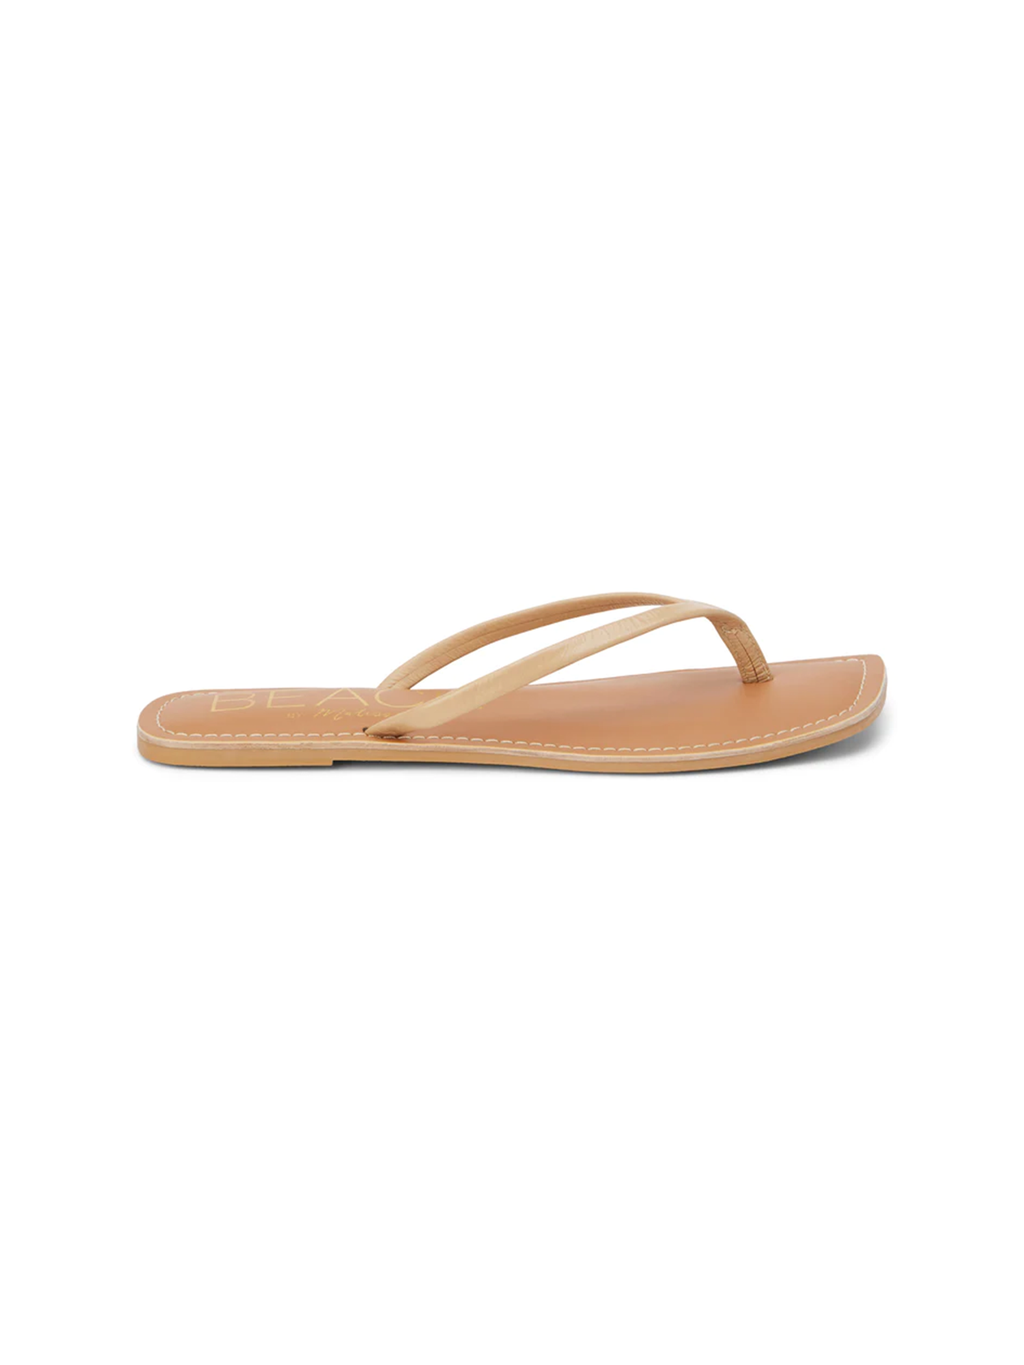 Bungalow Sandal in Natural - Stitch And Feather